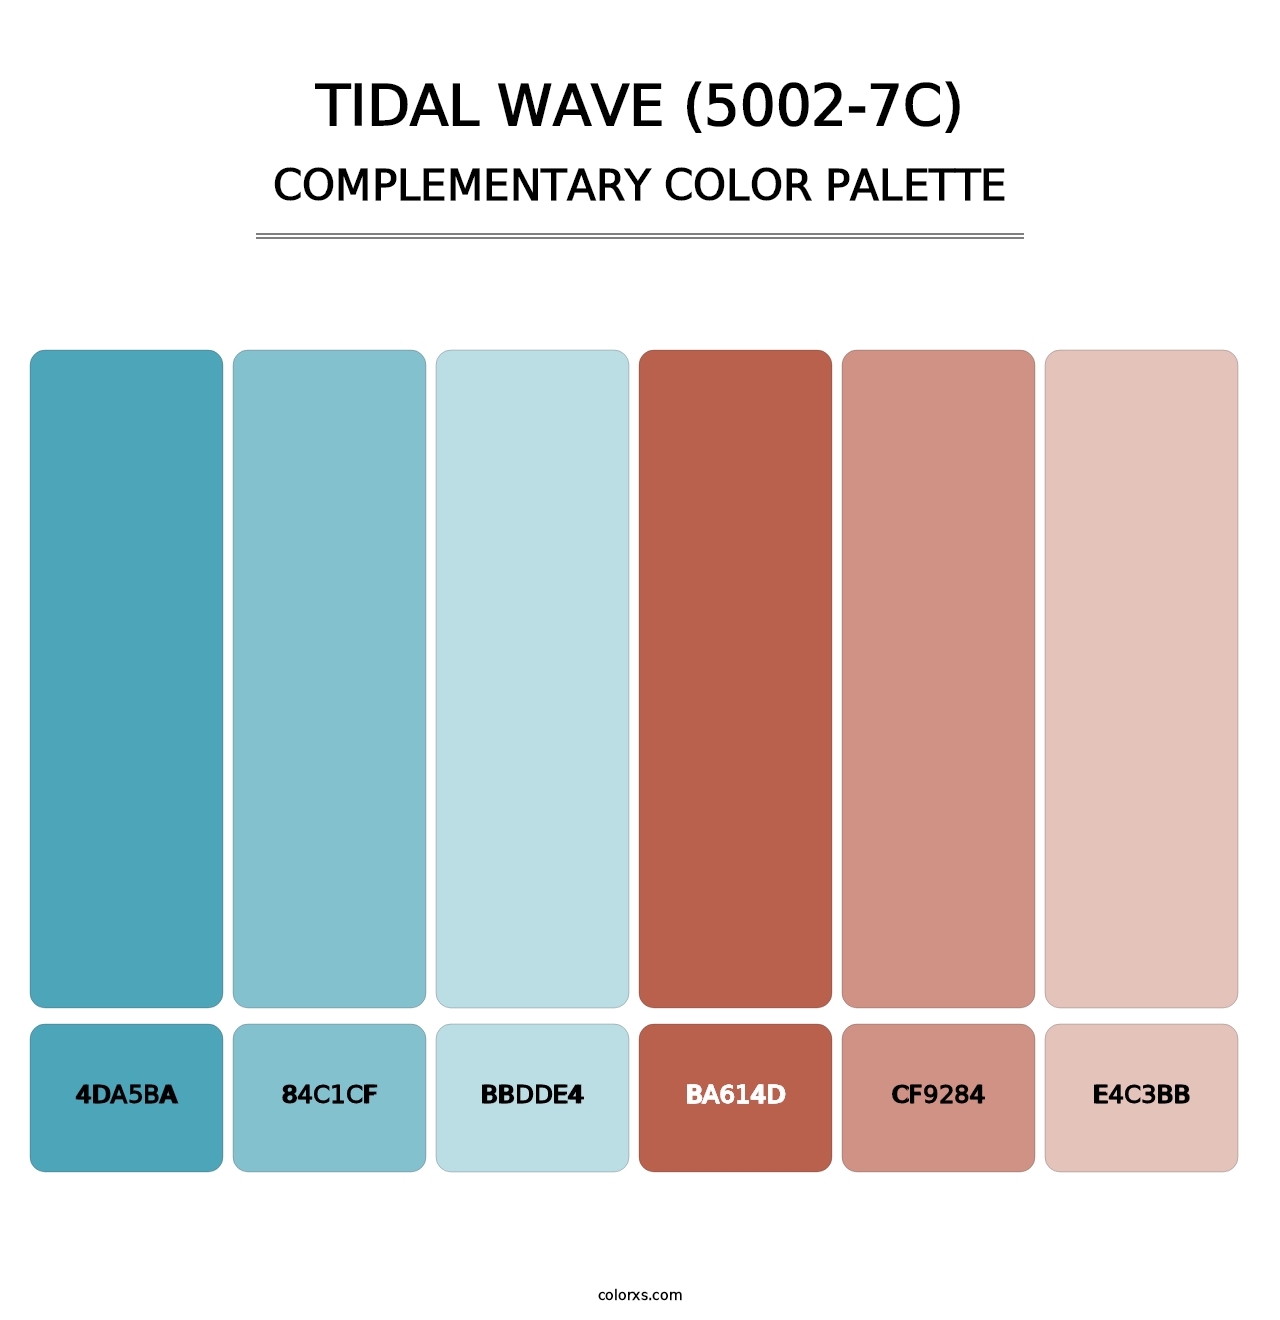 Tidal Wave (5002-7C) - Complementary Color Palette